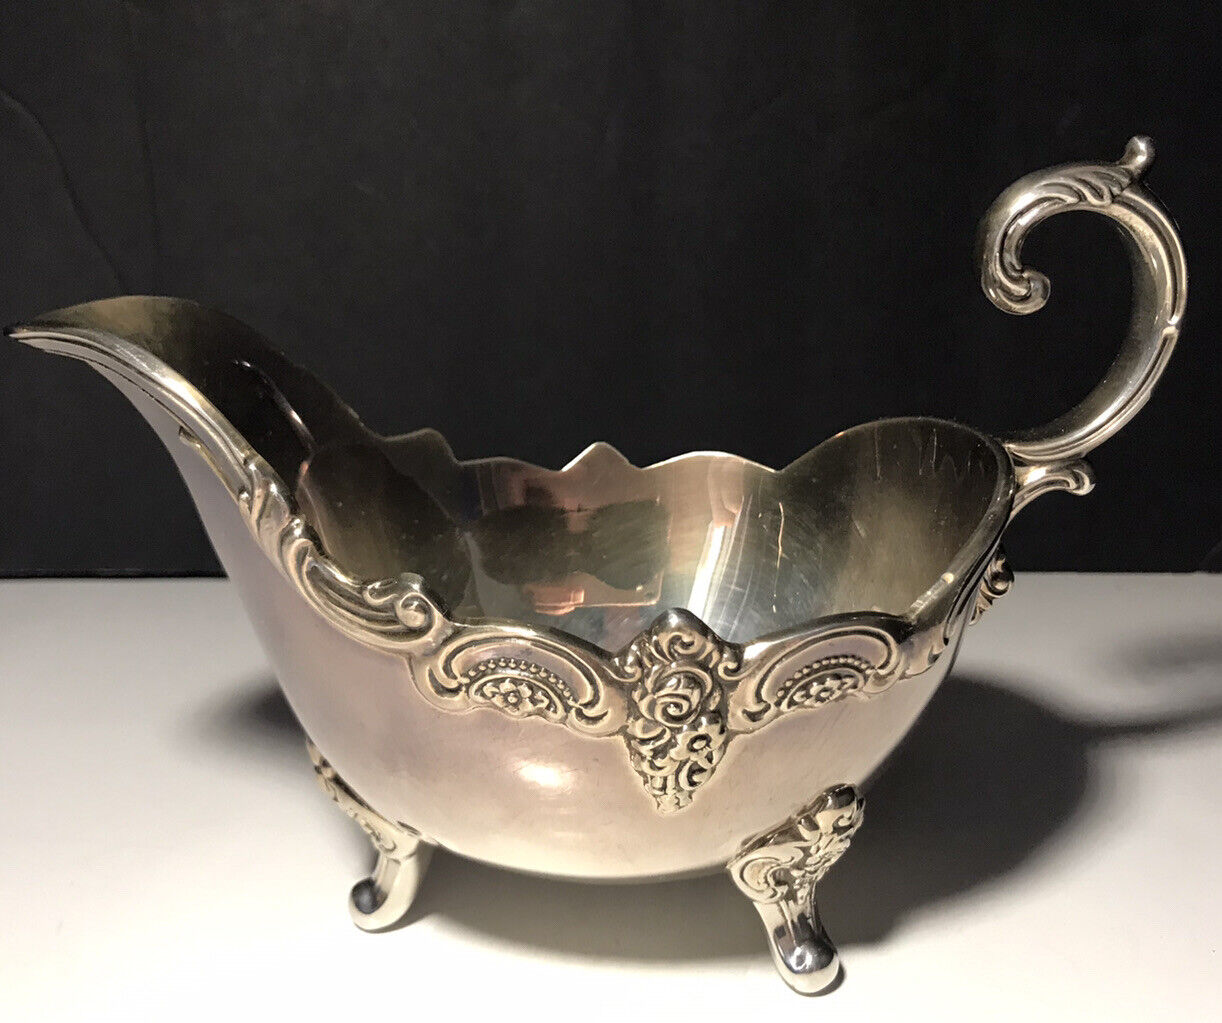 TOWLE E.P. 2930 Silver Plated Footed Gravy Boat with Decorative Trim